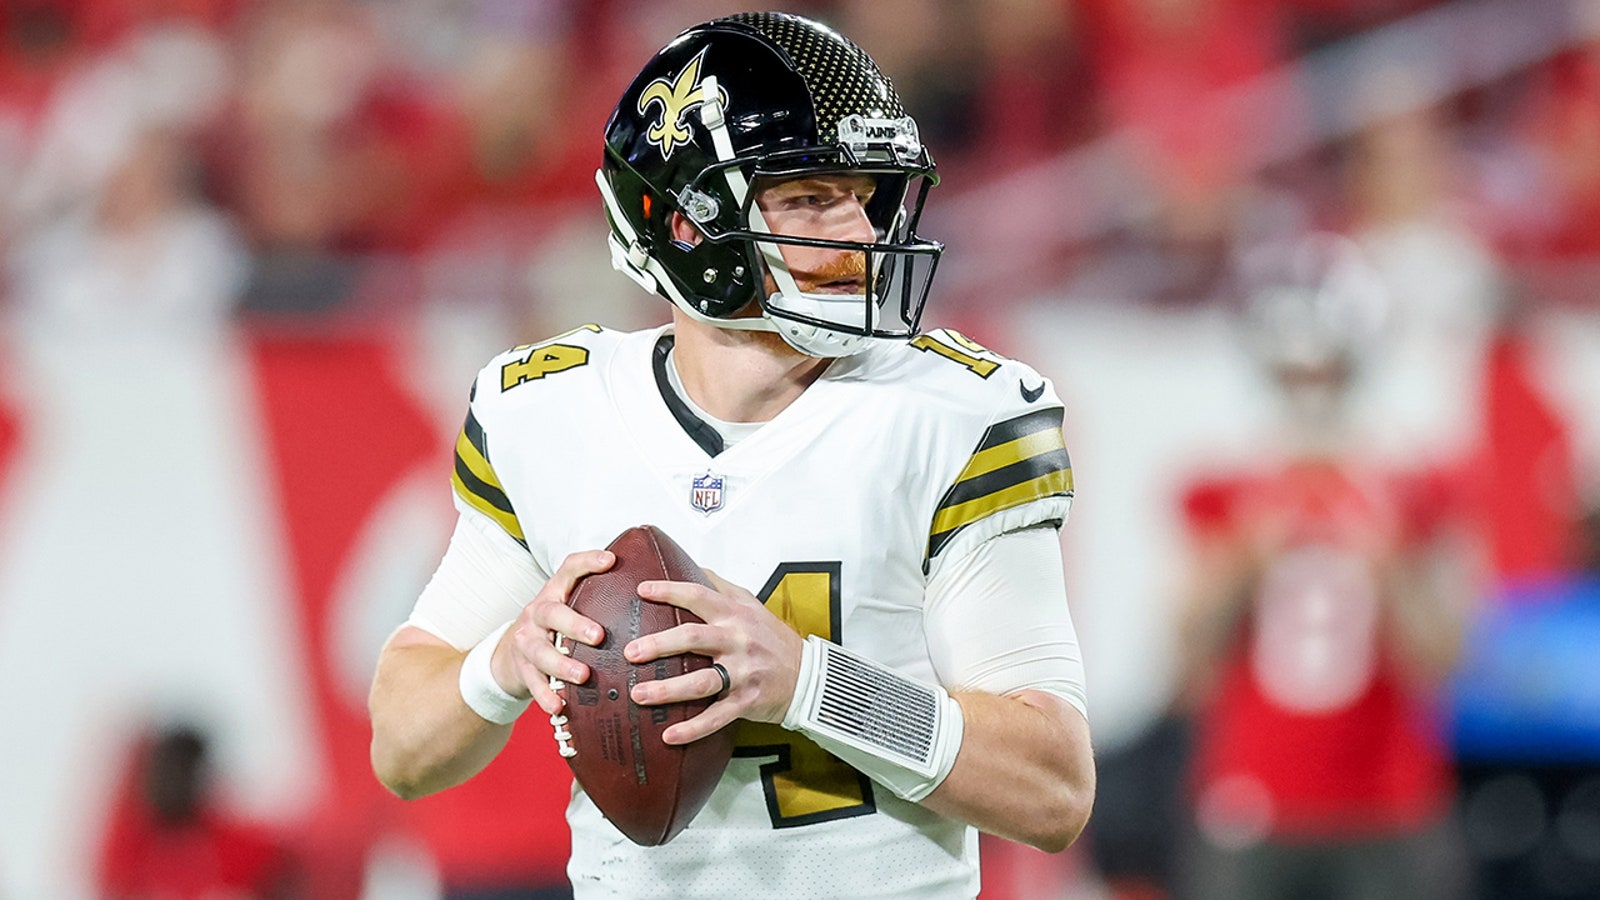 NFL Week 15: What should you bet for the Falcons and Saints matchup this weekend?